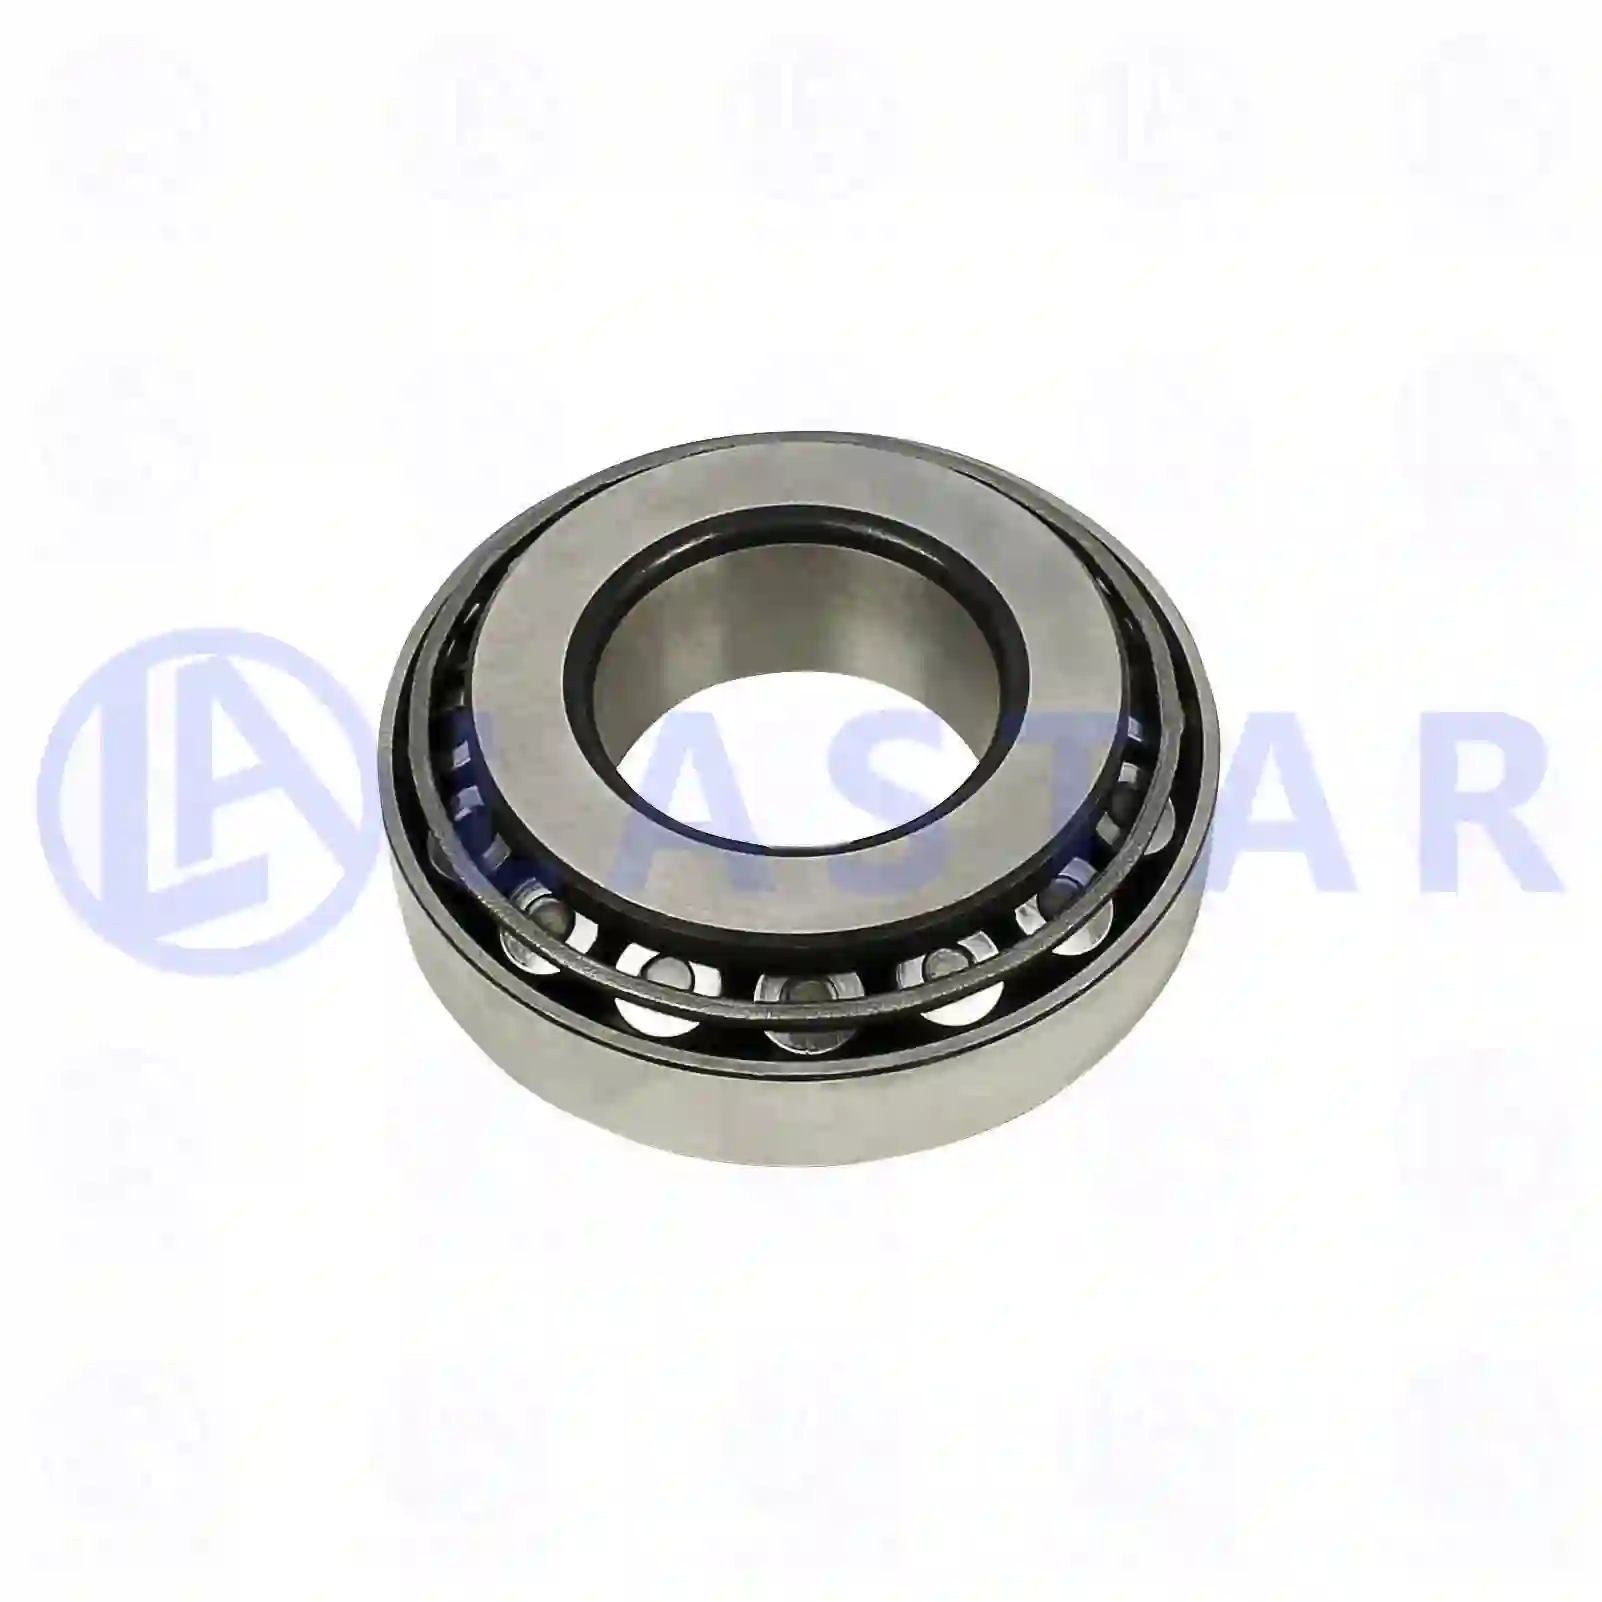 Tapered roller bearing, 77730370, 1400213, 81934200165, 81934200216, 81934200232, 0BA409123C ||  77730370 Lastar Spare Part | Truck Spare Parts, Auotomotive Spare Parts Tapered roller bearing, 77730370, 1400213, 81934200165, 81934200216, 81934200232, 0BA409123C ||  77730370 Lastar Spare Part | Truck Spare Parts, Auotomotive Spare Parts